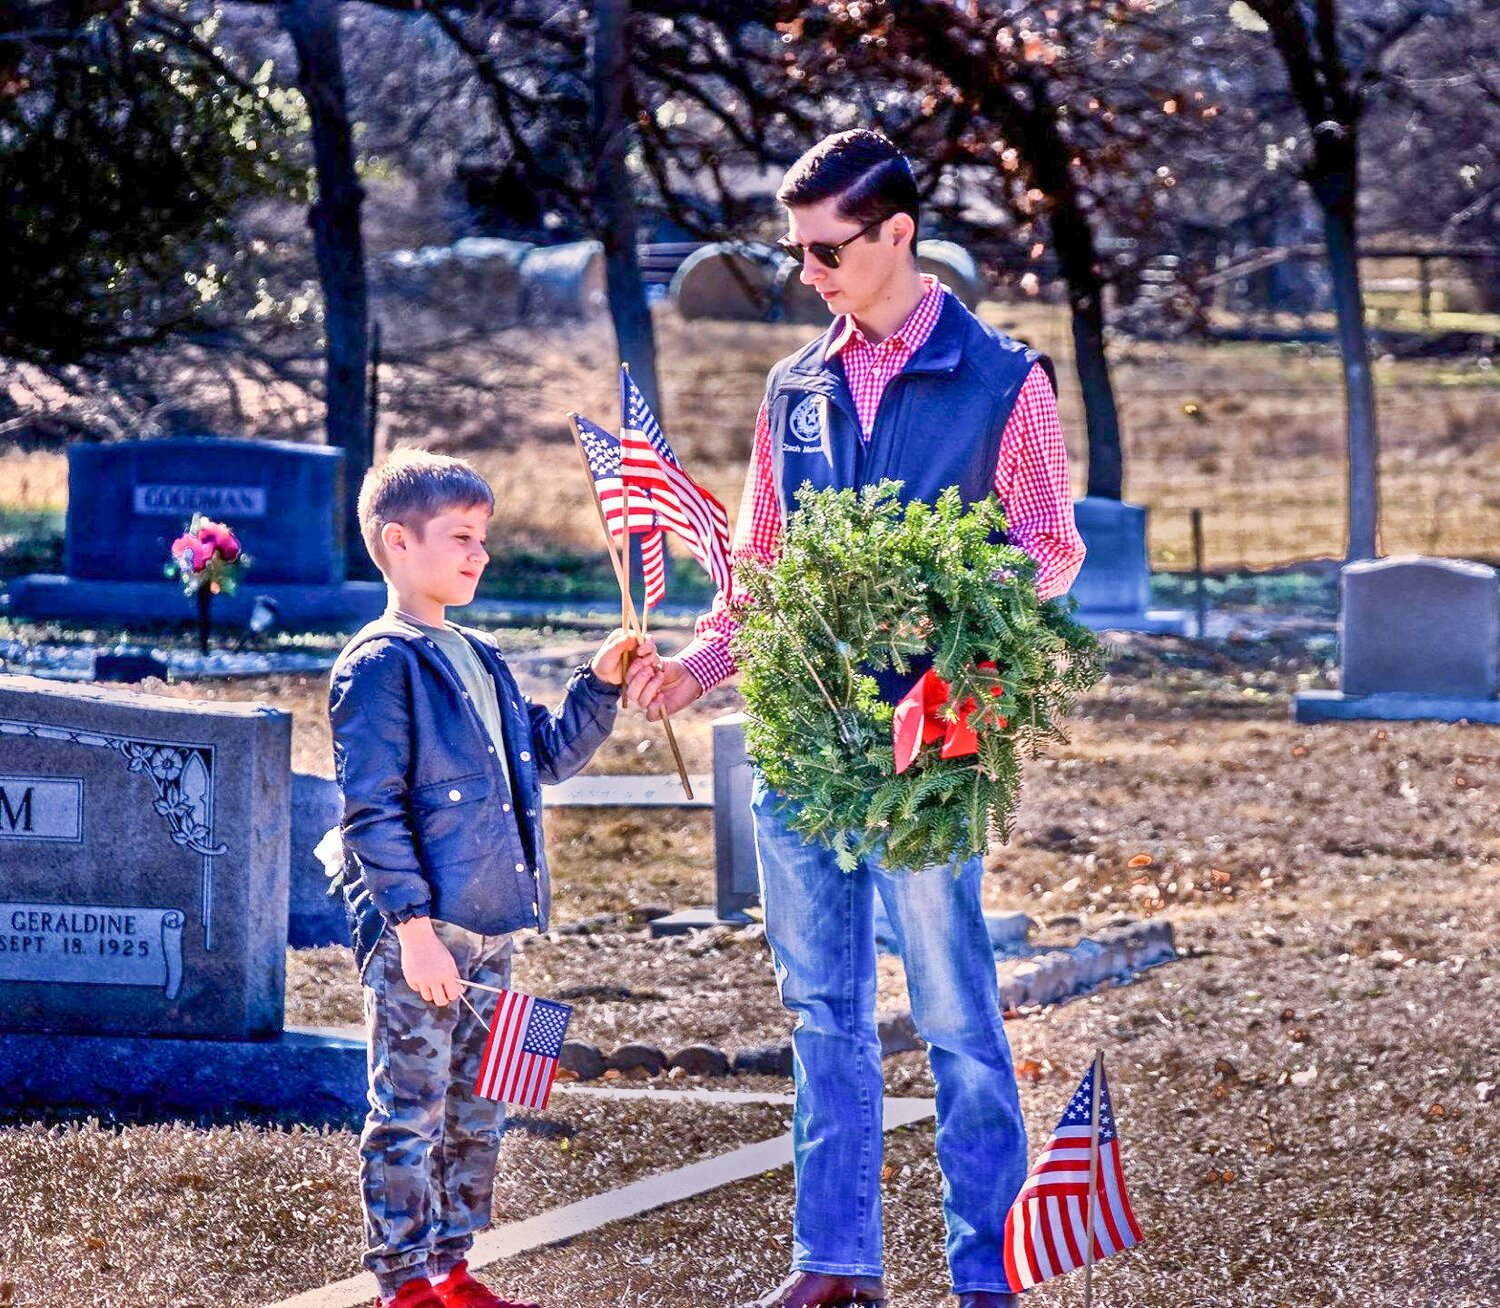 The Hood County community will remember fallen veterans, honor those who serve, and teach the next generation the value of freedom through Acton Cemetery’s annual Wreaths Across America ceremony beginning at noon on Saturday, Dec. 16.